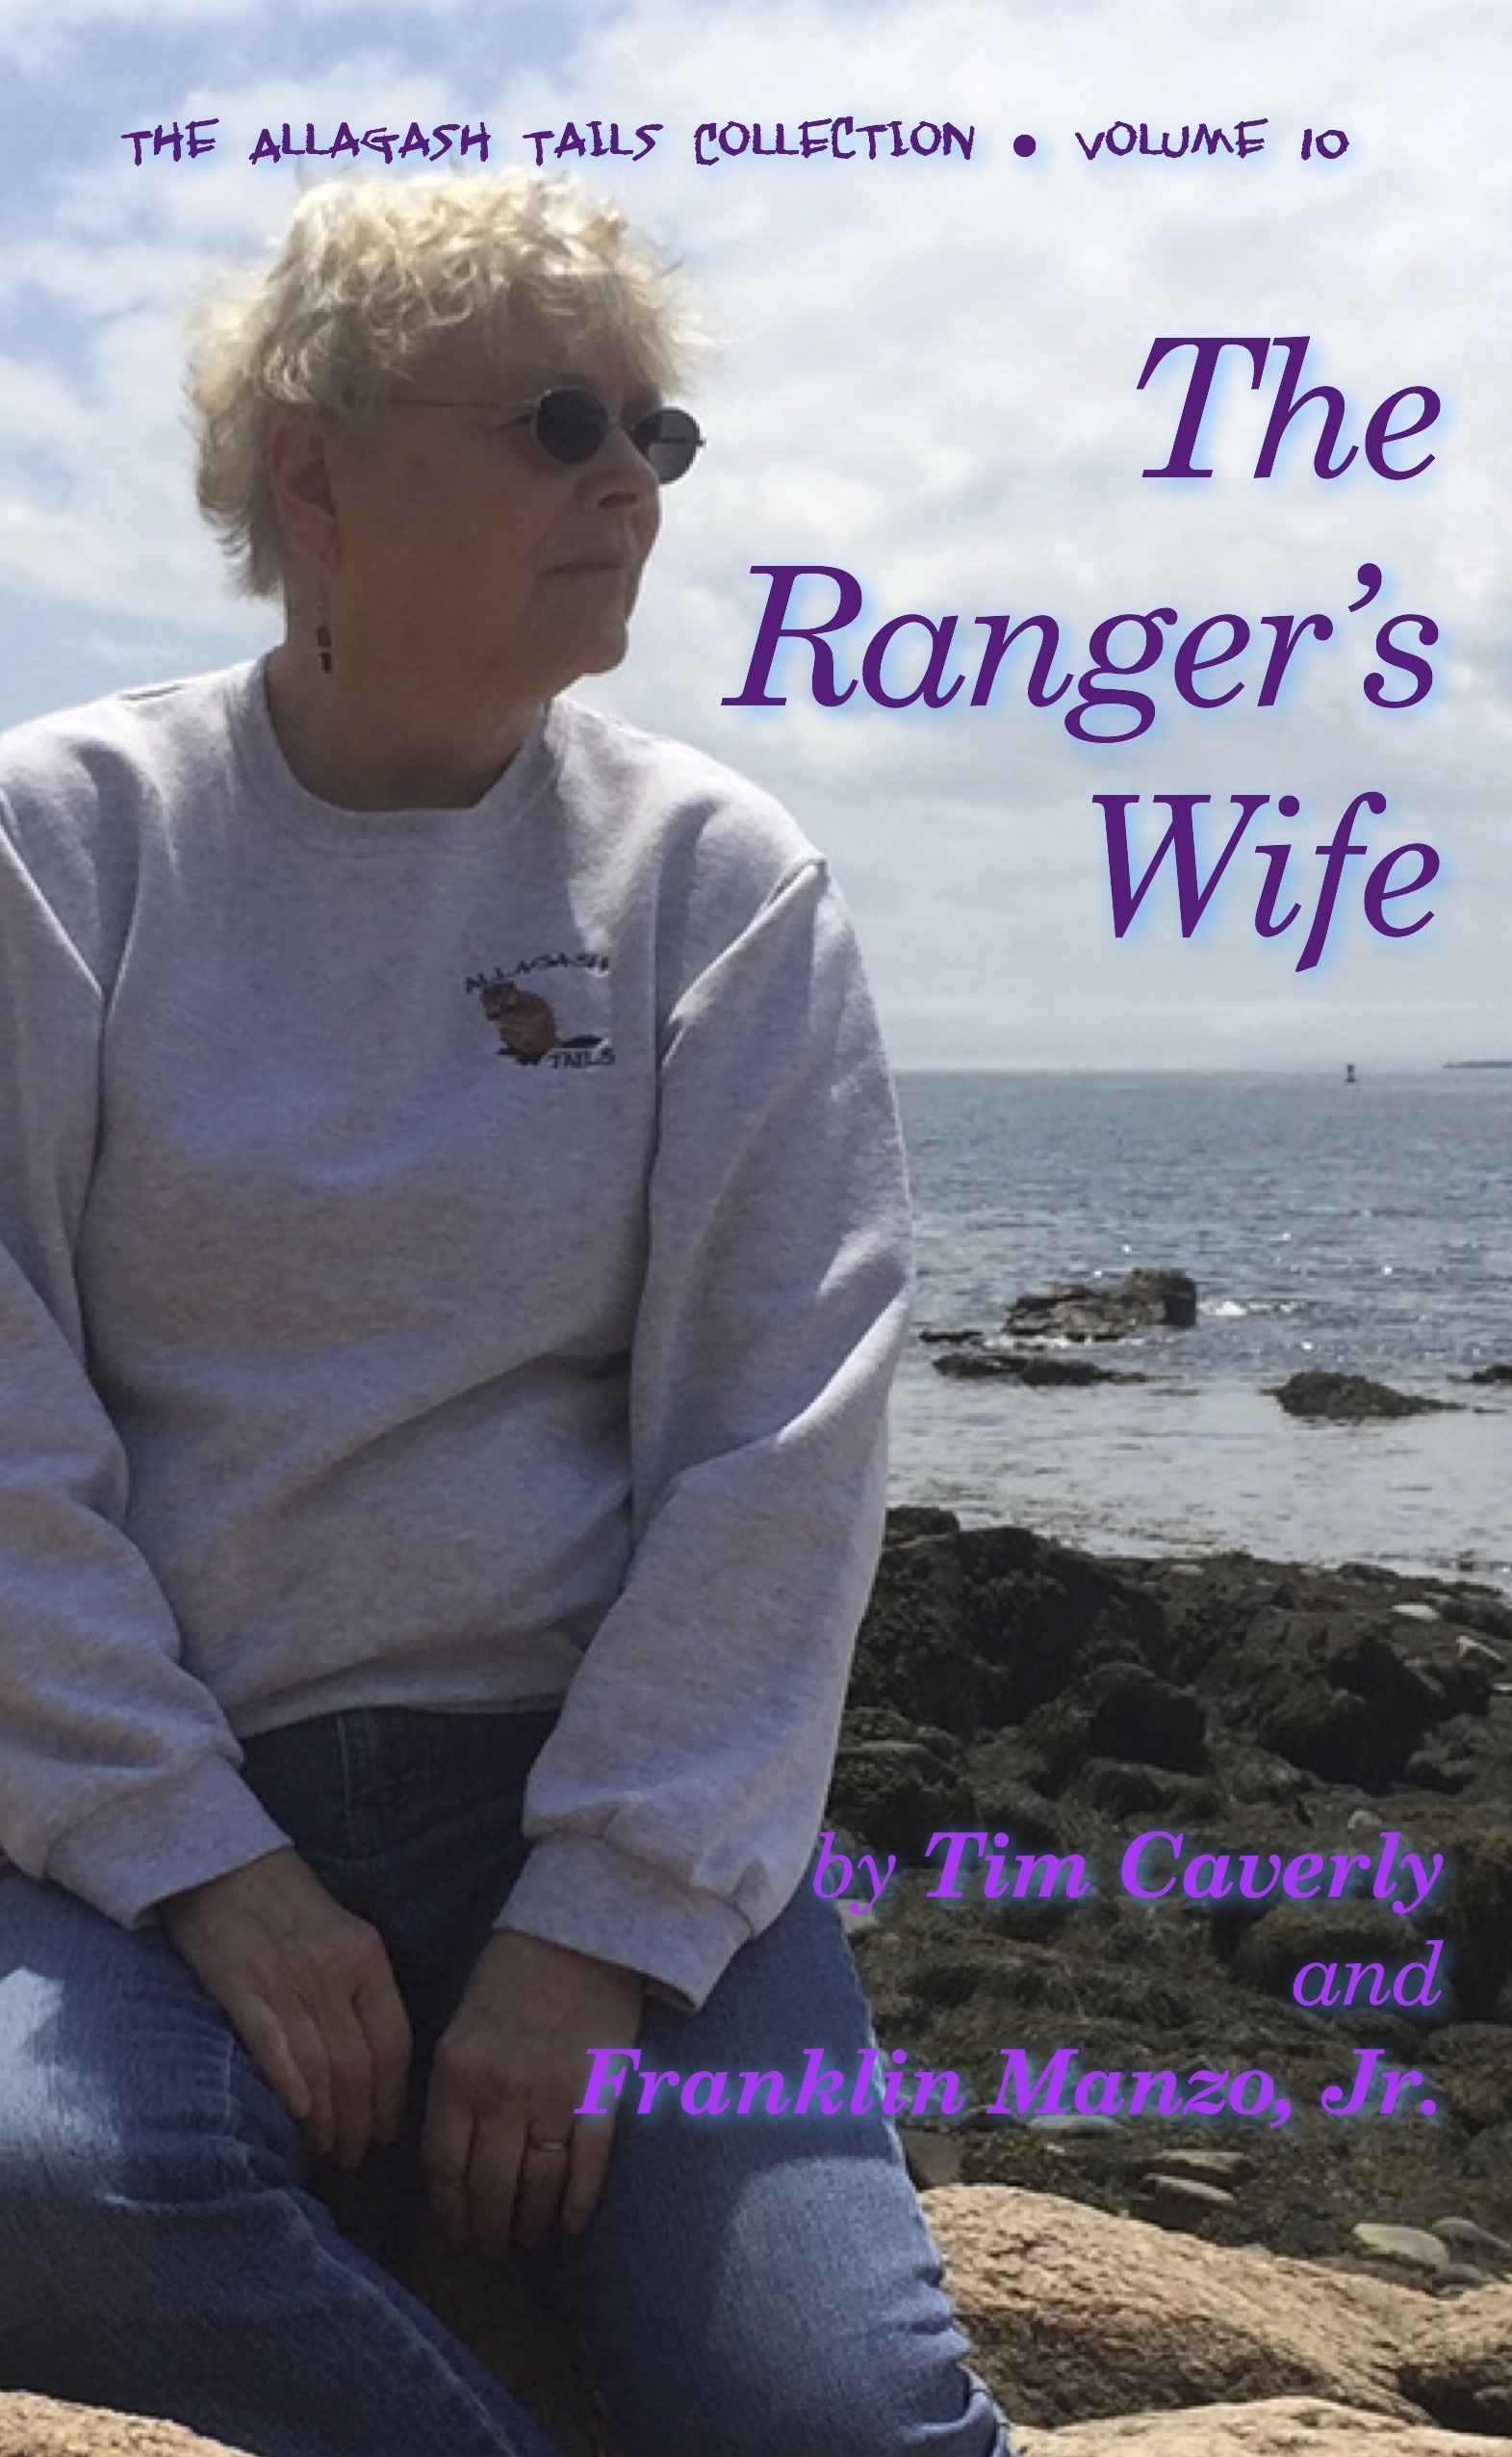 The Ranger’s Wife • Allagash Tails Collection Volume 10